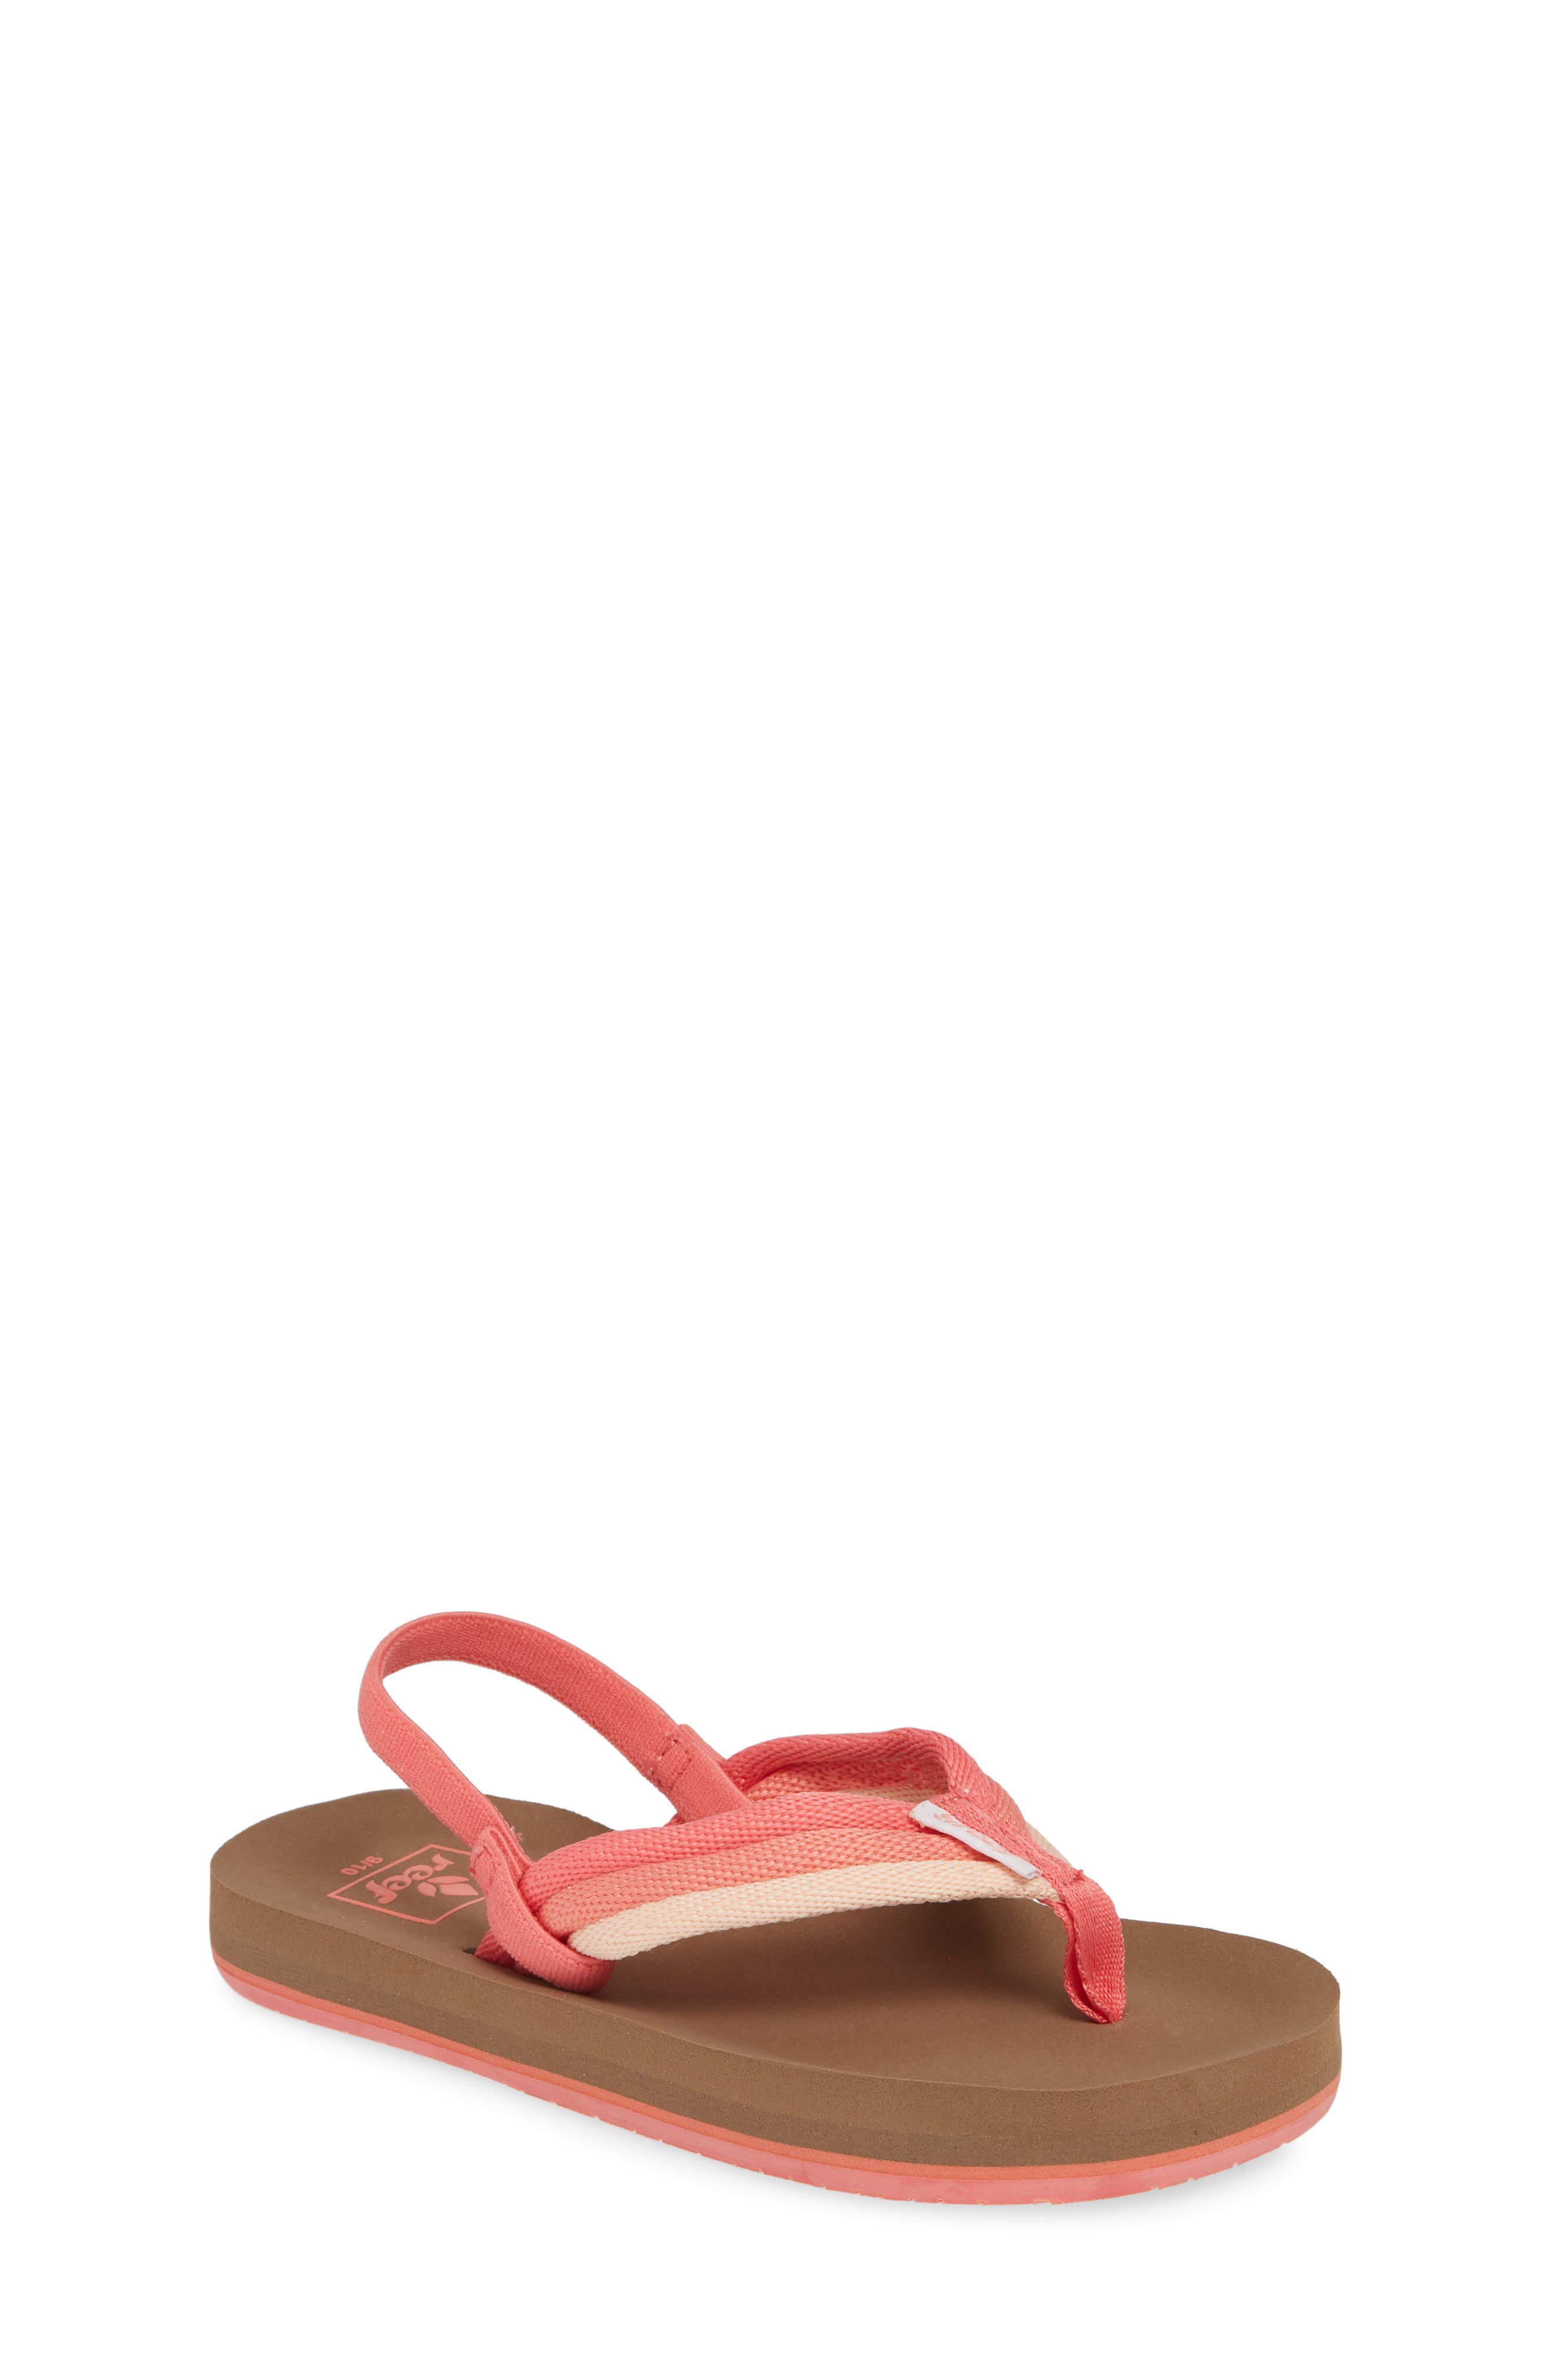 tory burch sandals outlet price